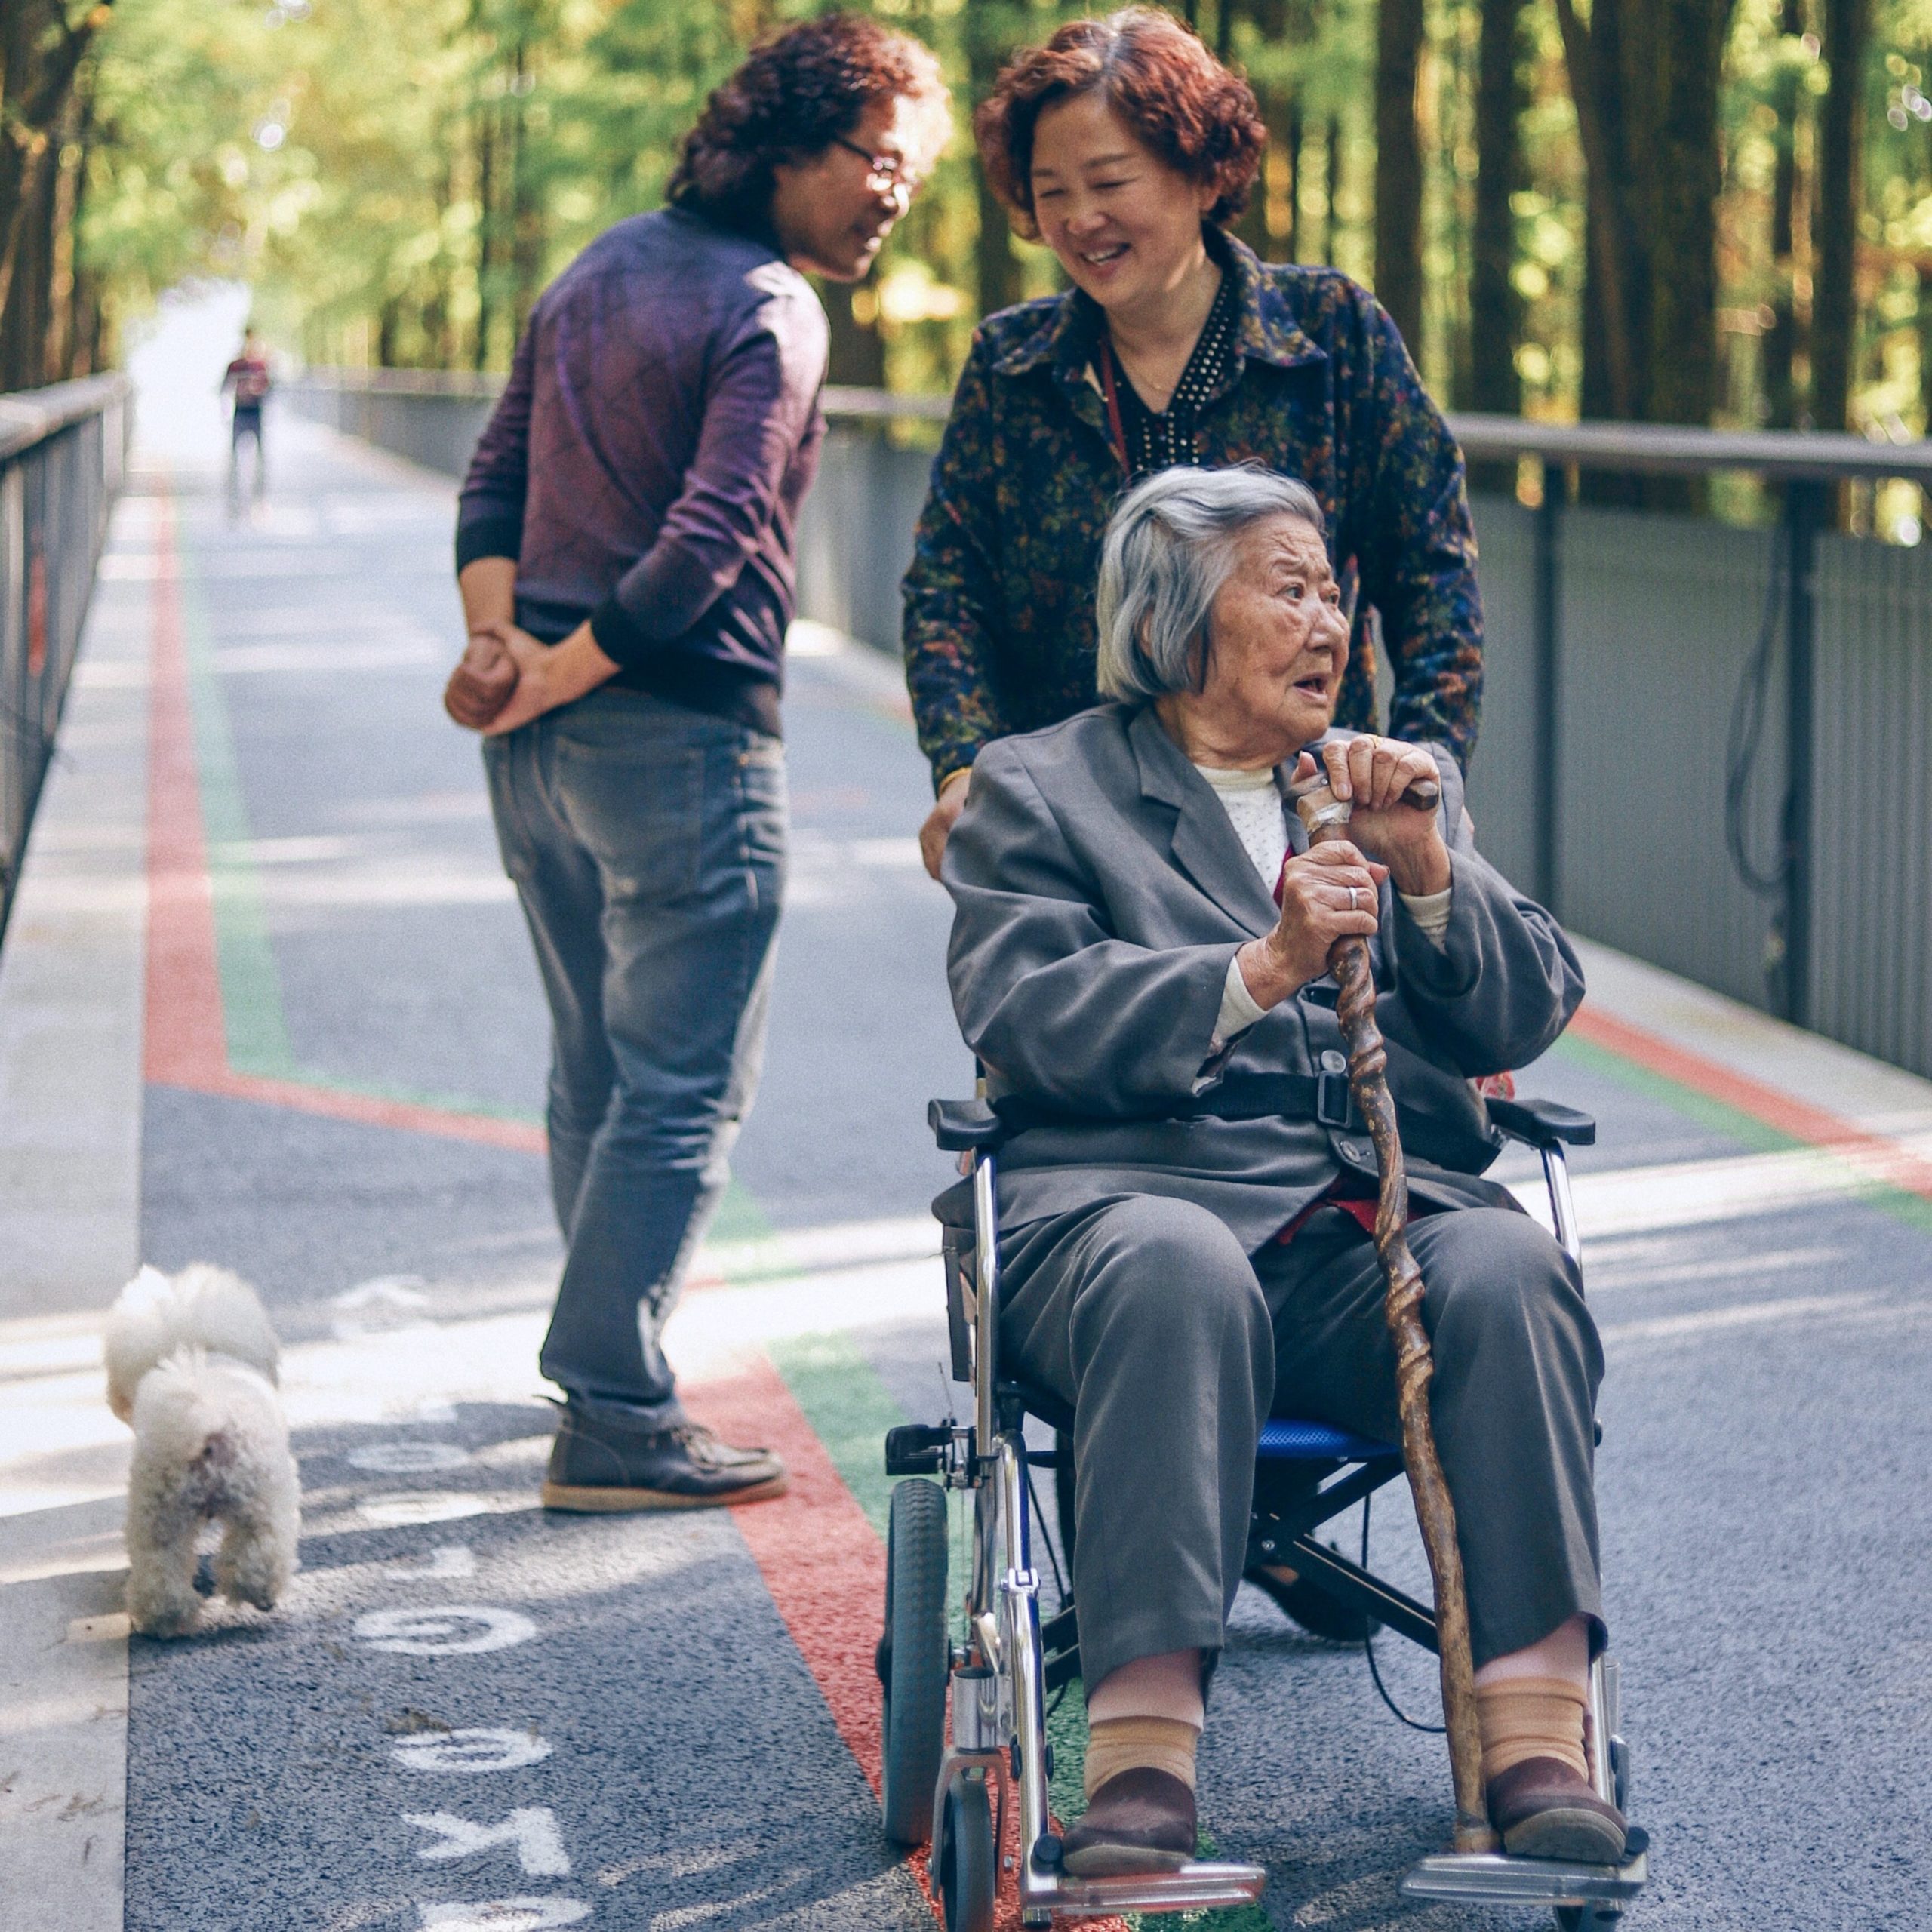 Asian American woman pushing her mother in a wheelchair along a walking bridge in woods. Man passing by them.